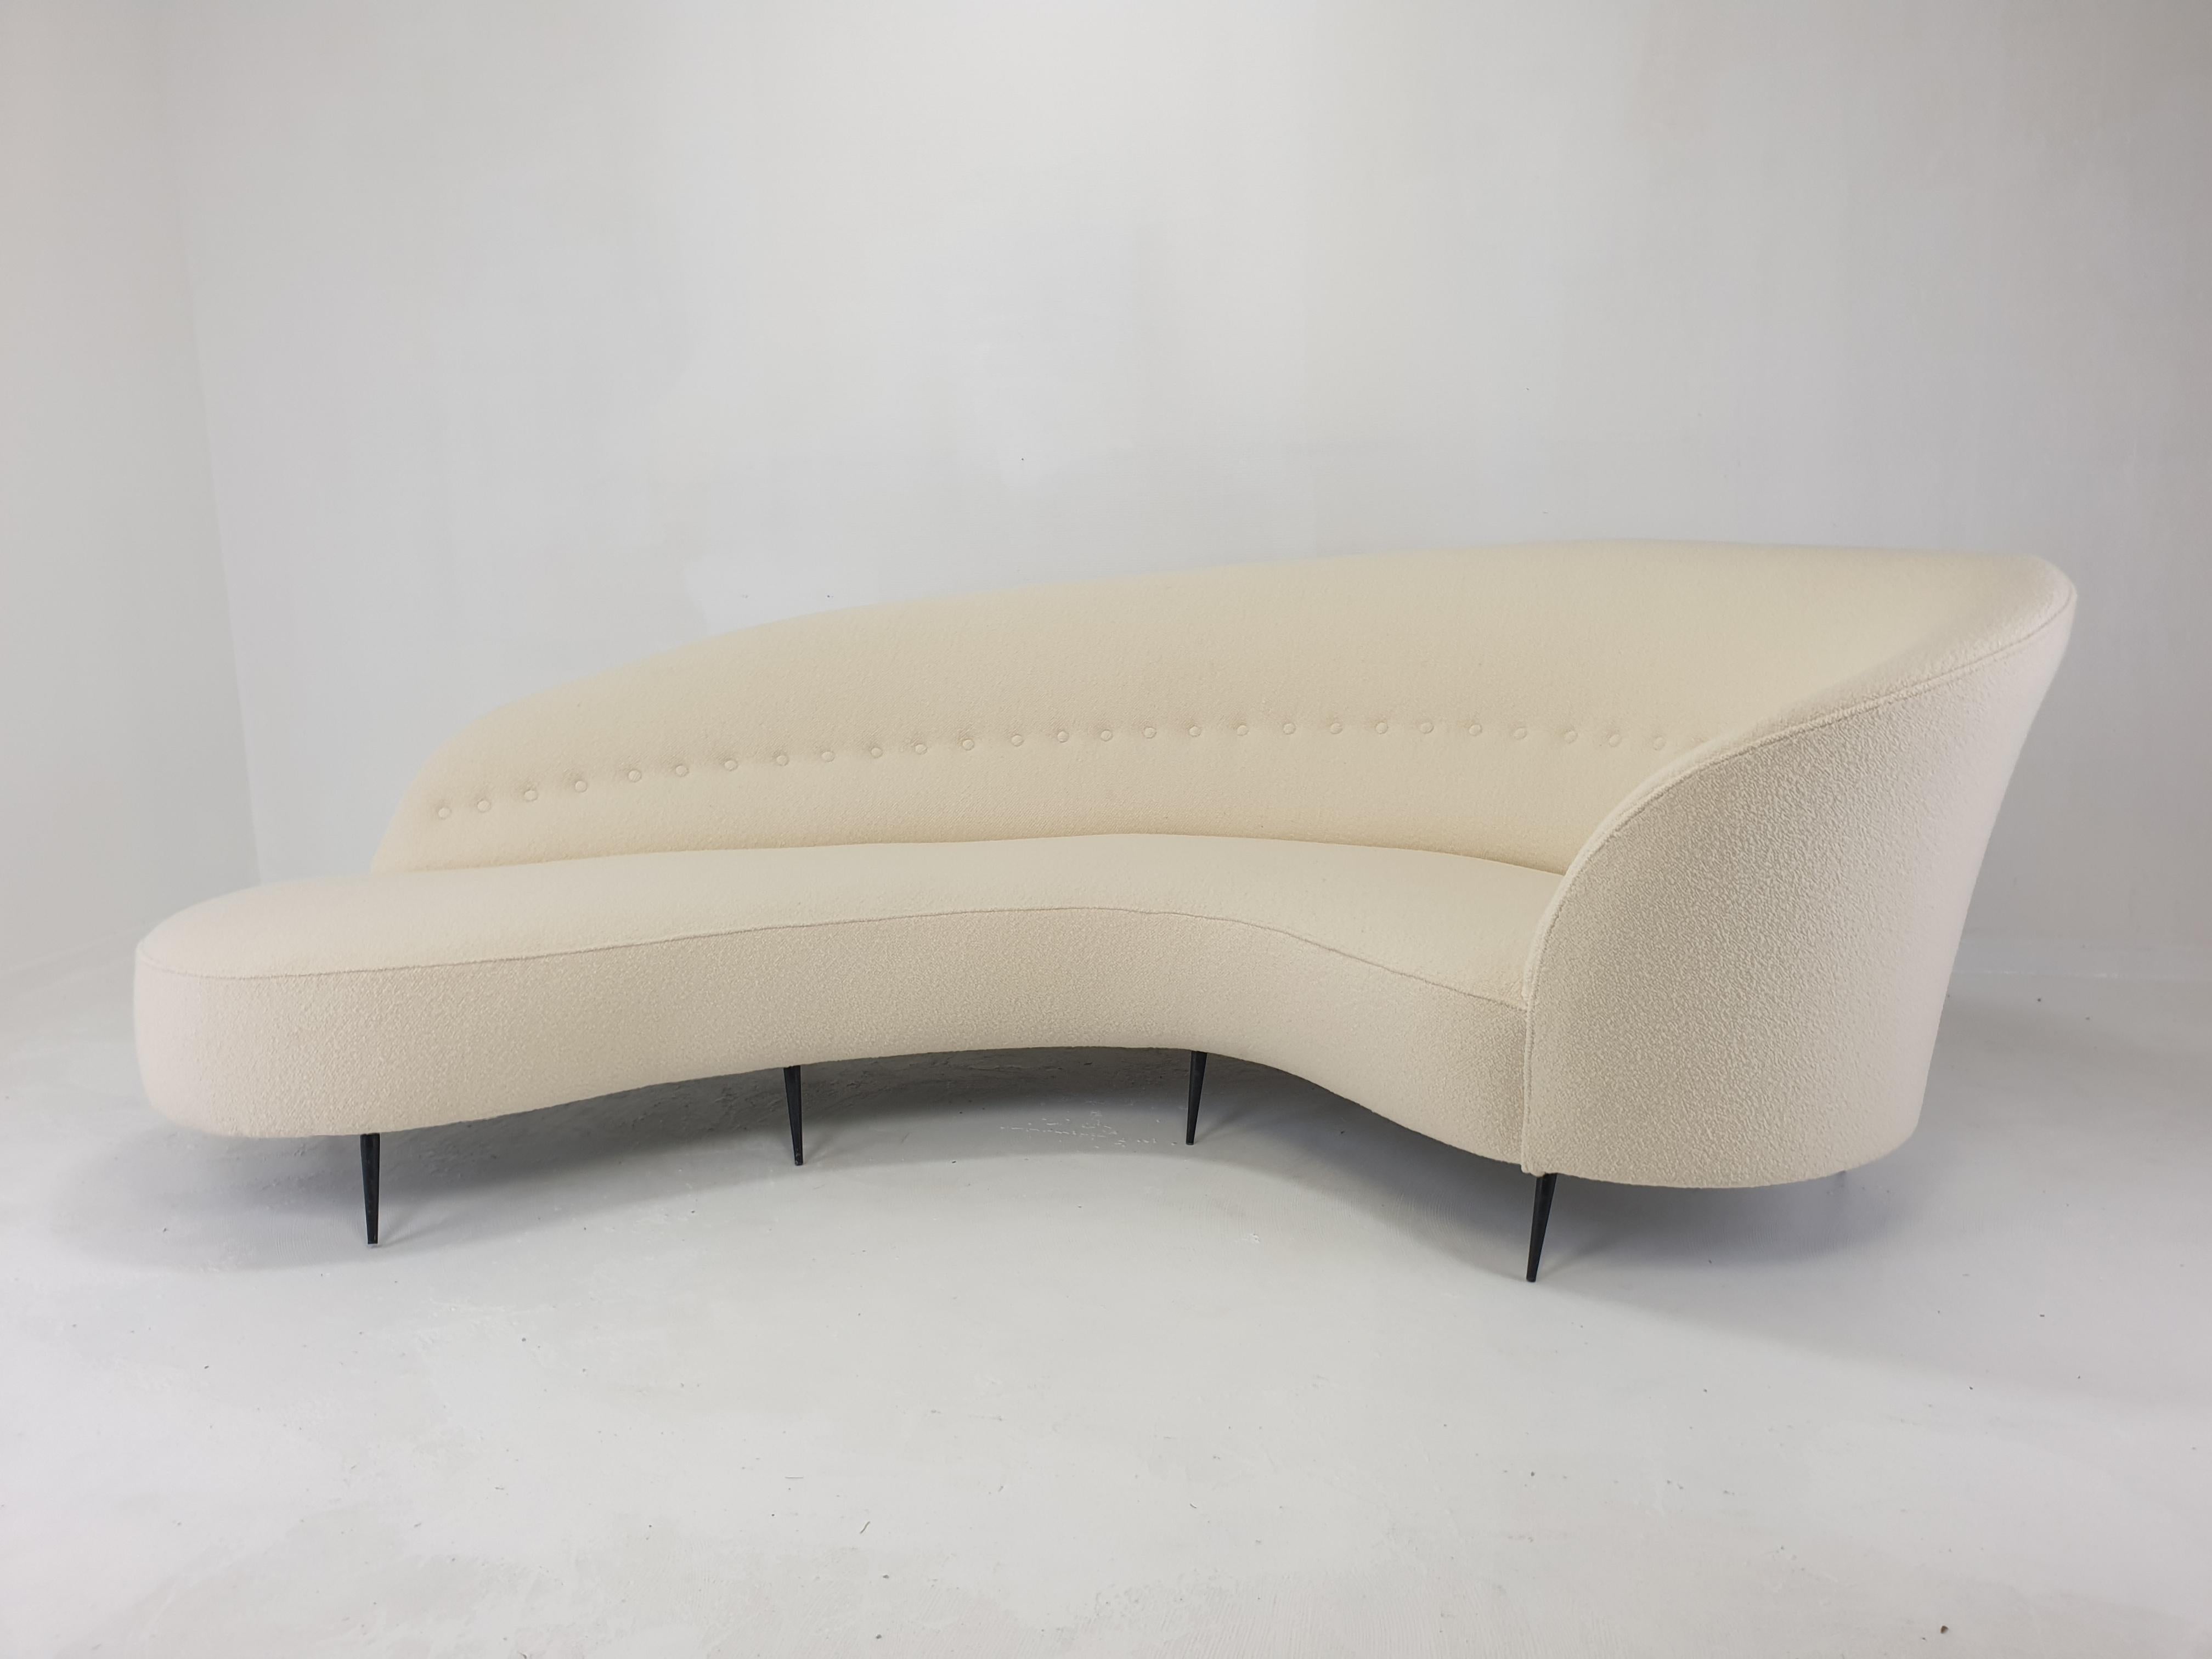 A stunning and lovely curved Italian sofa by Federico Munari, original from the 50's.
This amazing sofa has a deep, highly comfortable seat and a gracefully sloping back. 

The original Federico Munari sofa is restored and newly upholstered in a